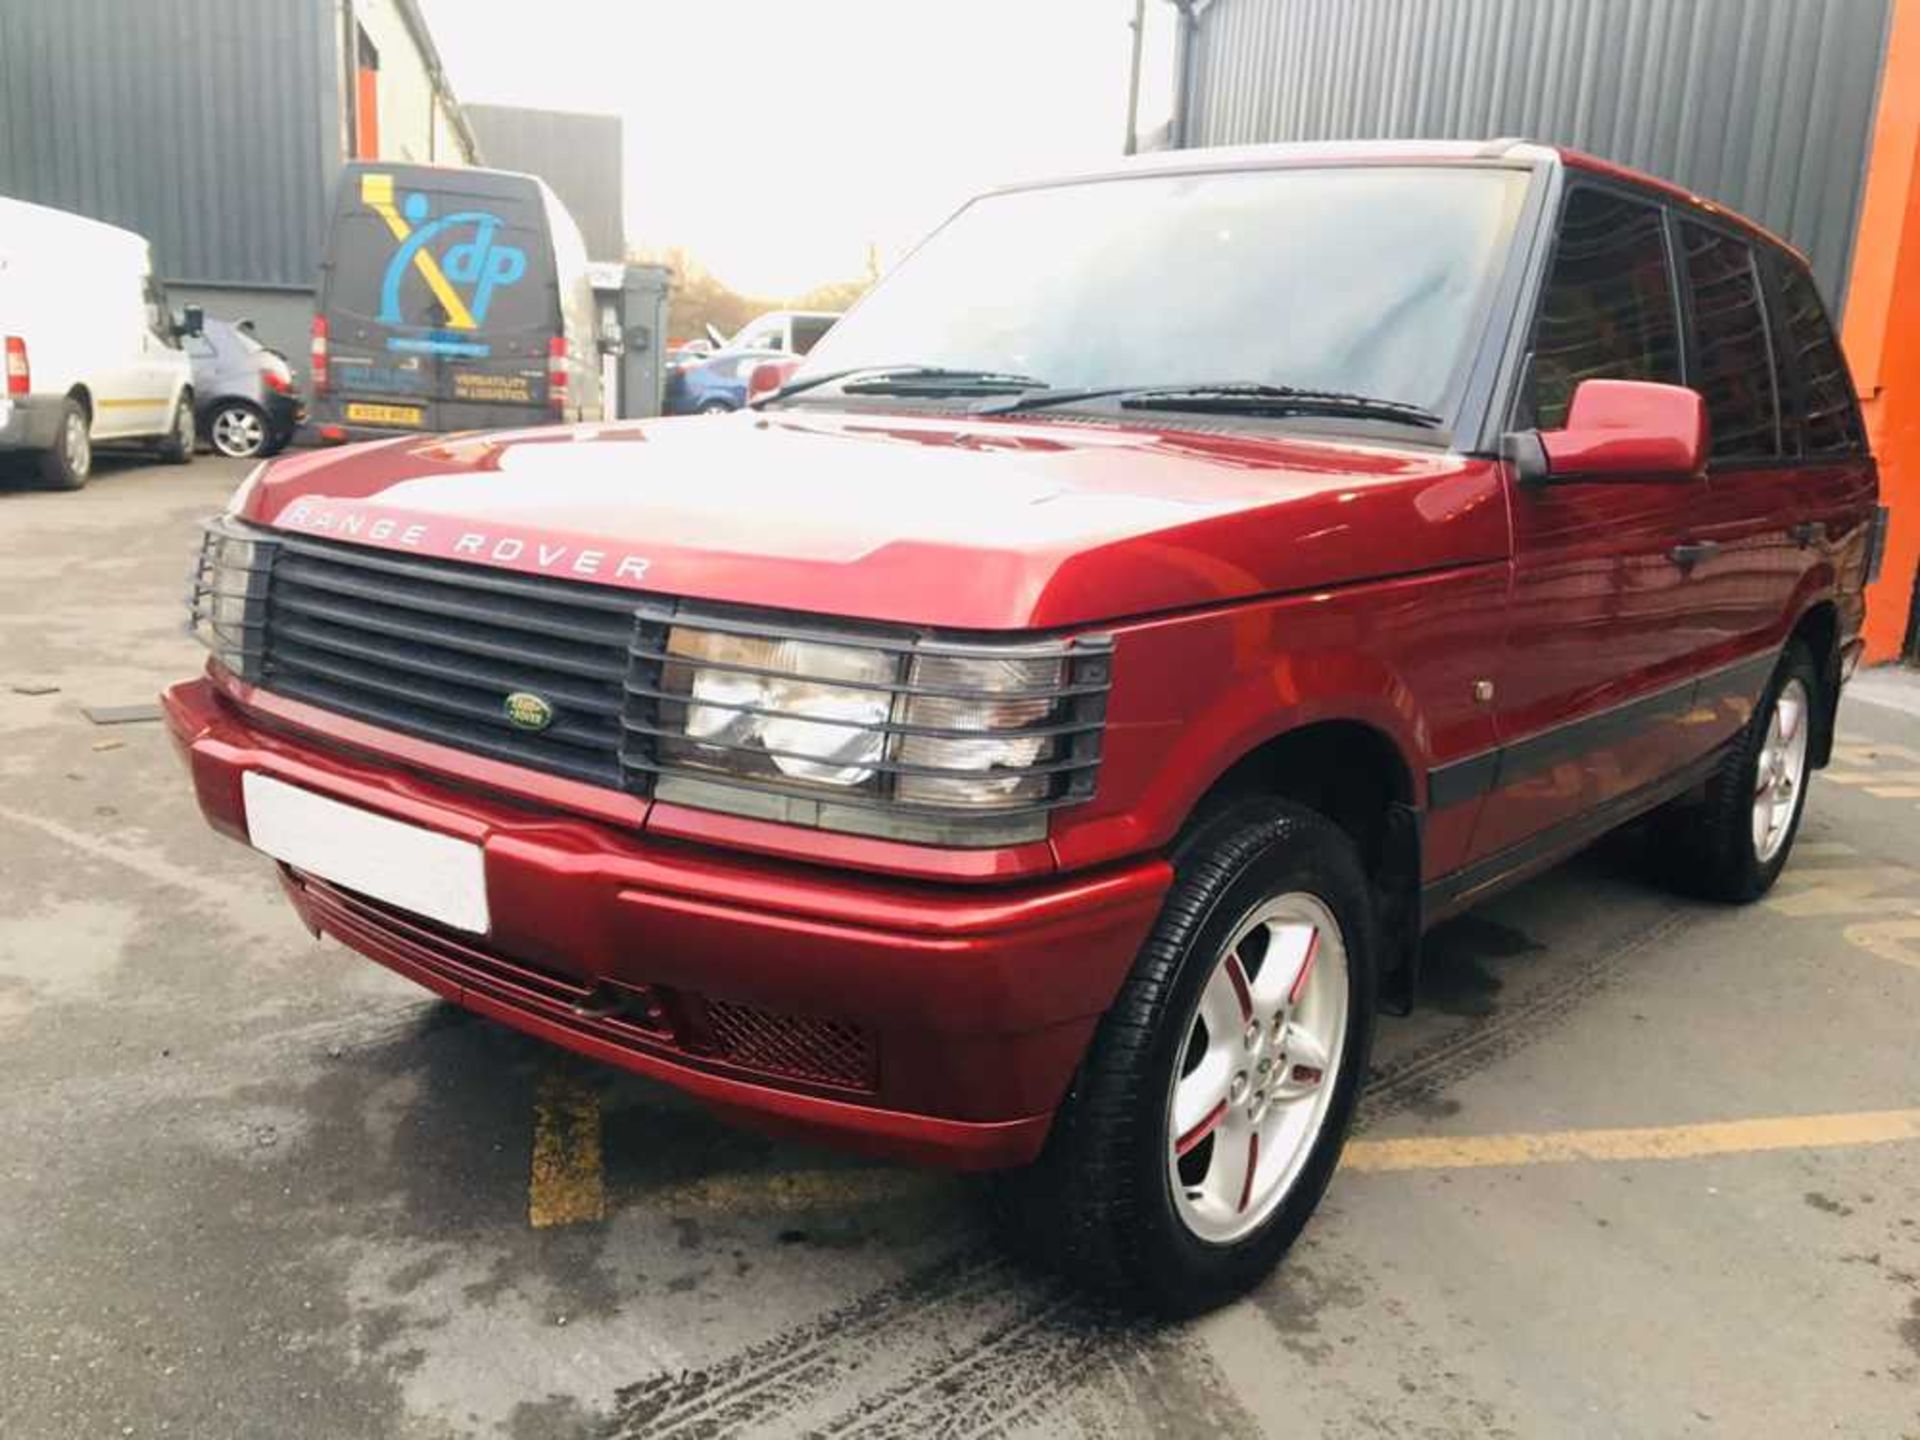 2001 Range Rover 2.5 TD Bordeaux One of just 200 UK-supplied limited edition 'Bordeaux' examples - Bild 3 aus 20